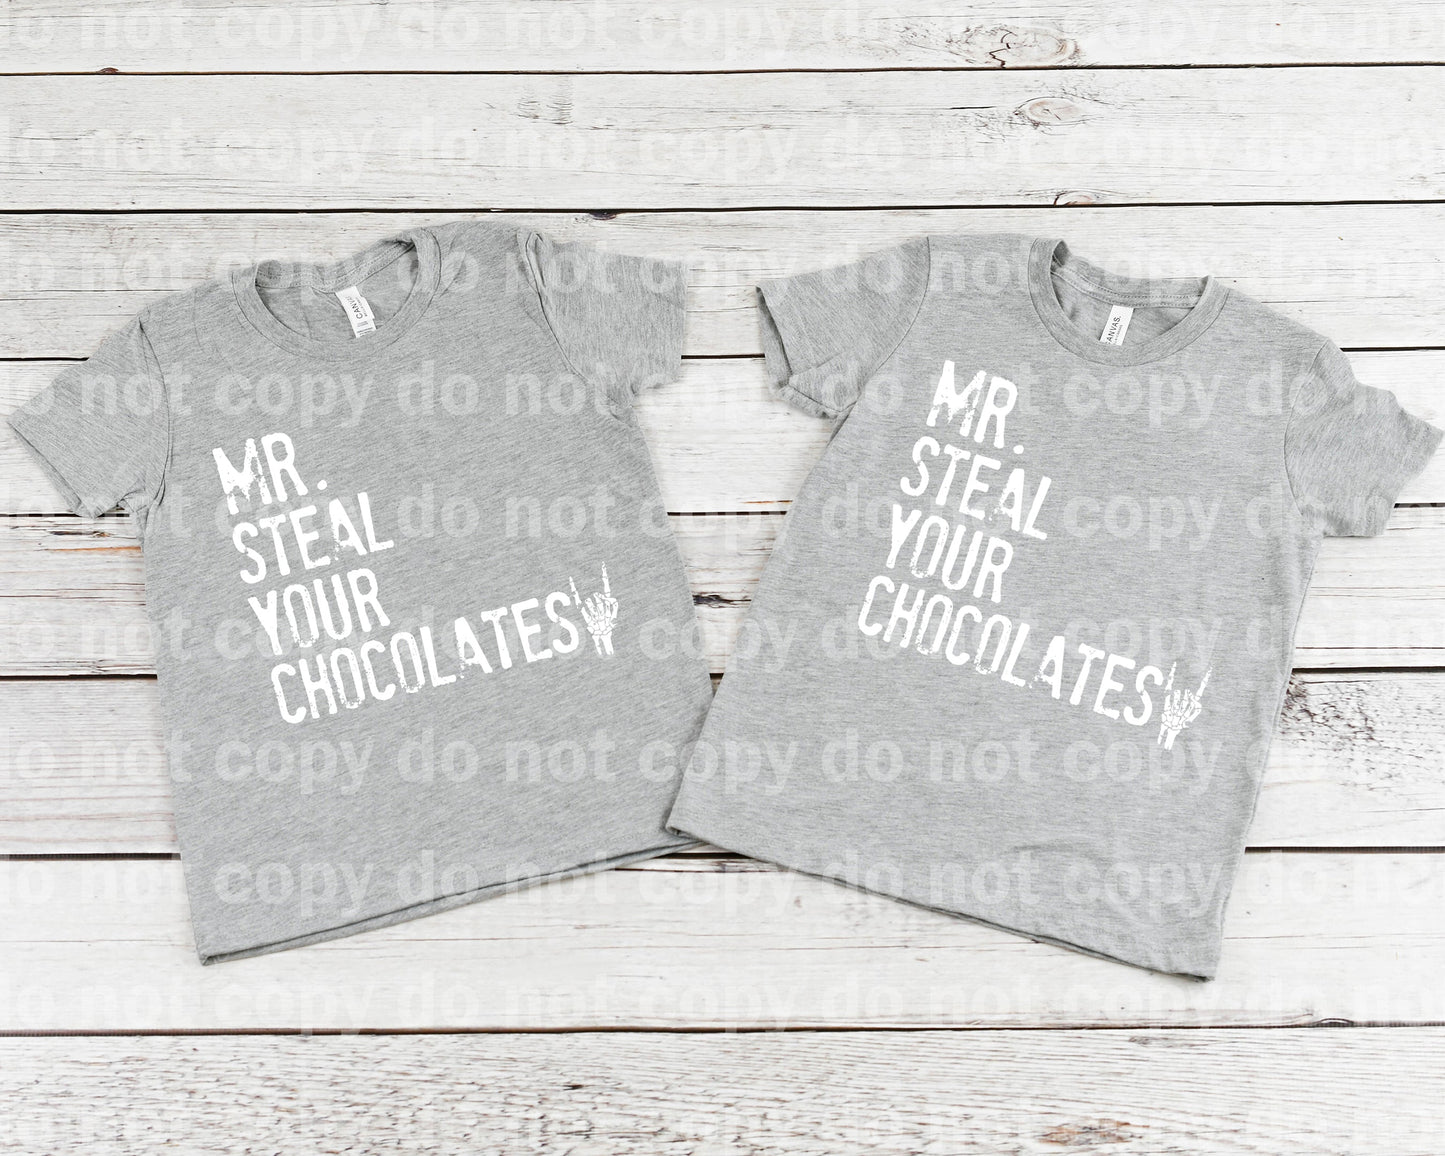 Mr. Steal Your Chocolates Black/White Dream Print or Sublimation Print